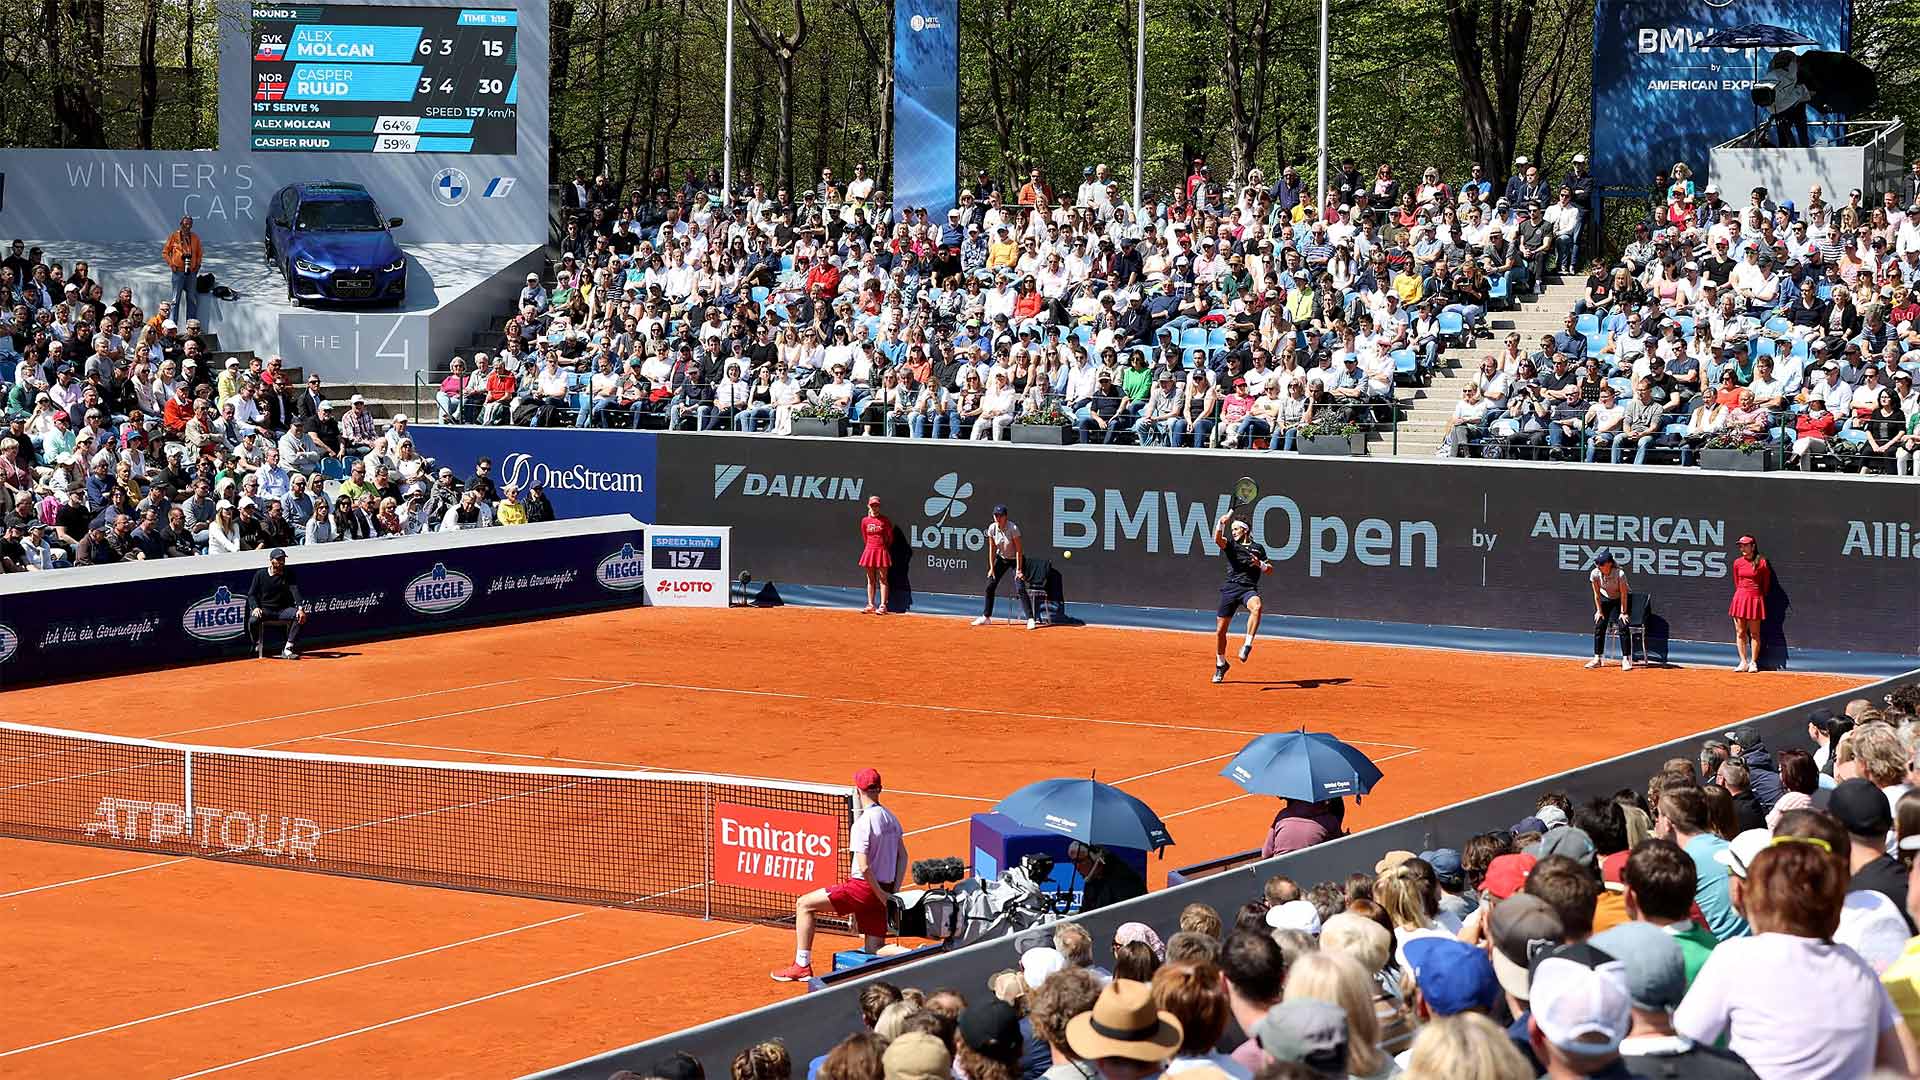 ATP tour schedule 2022: All of this year's tennis tournaments in FULL, Tennis, Sport